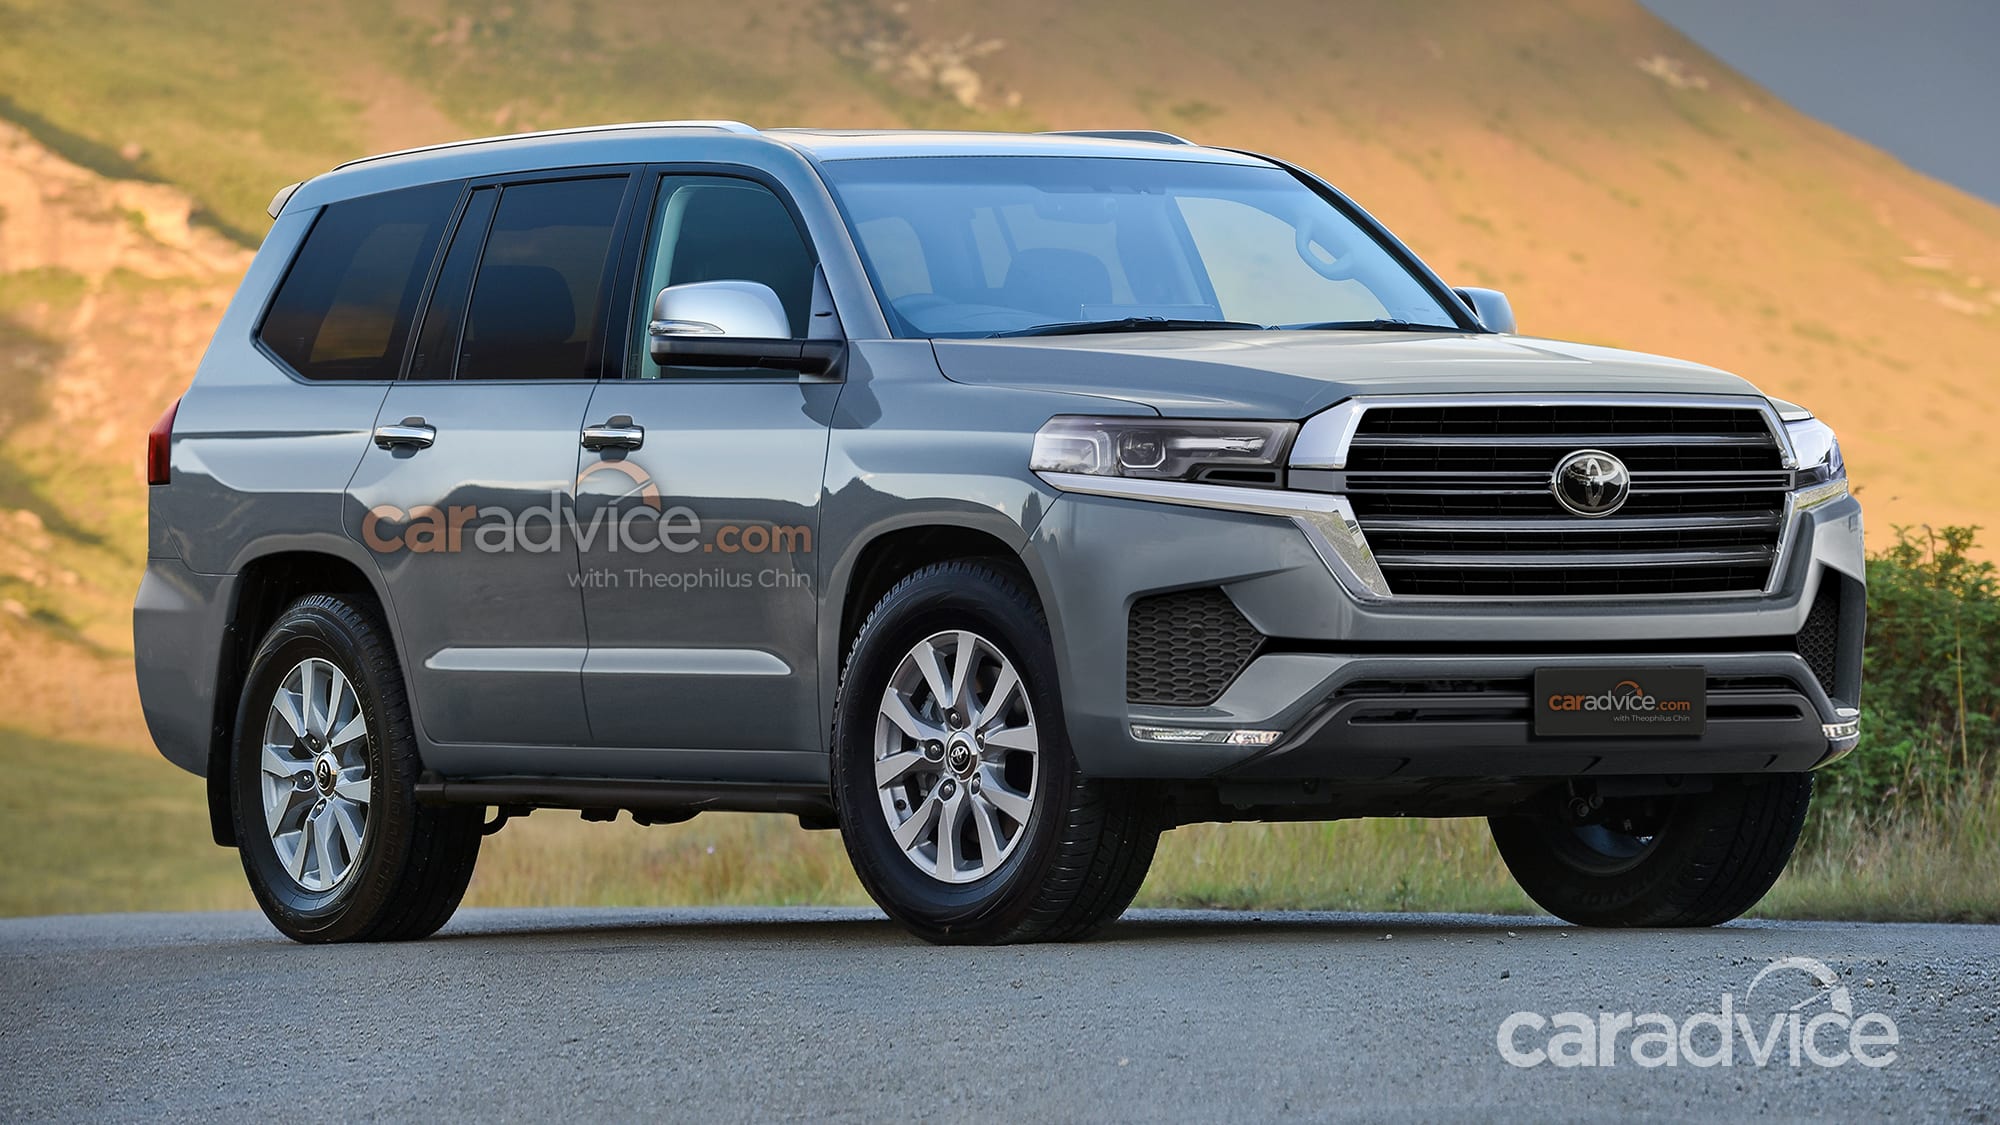 2022 Toyota LandCruiser 300 Series spied for the first ...